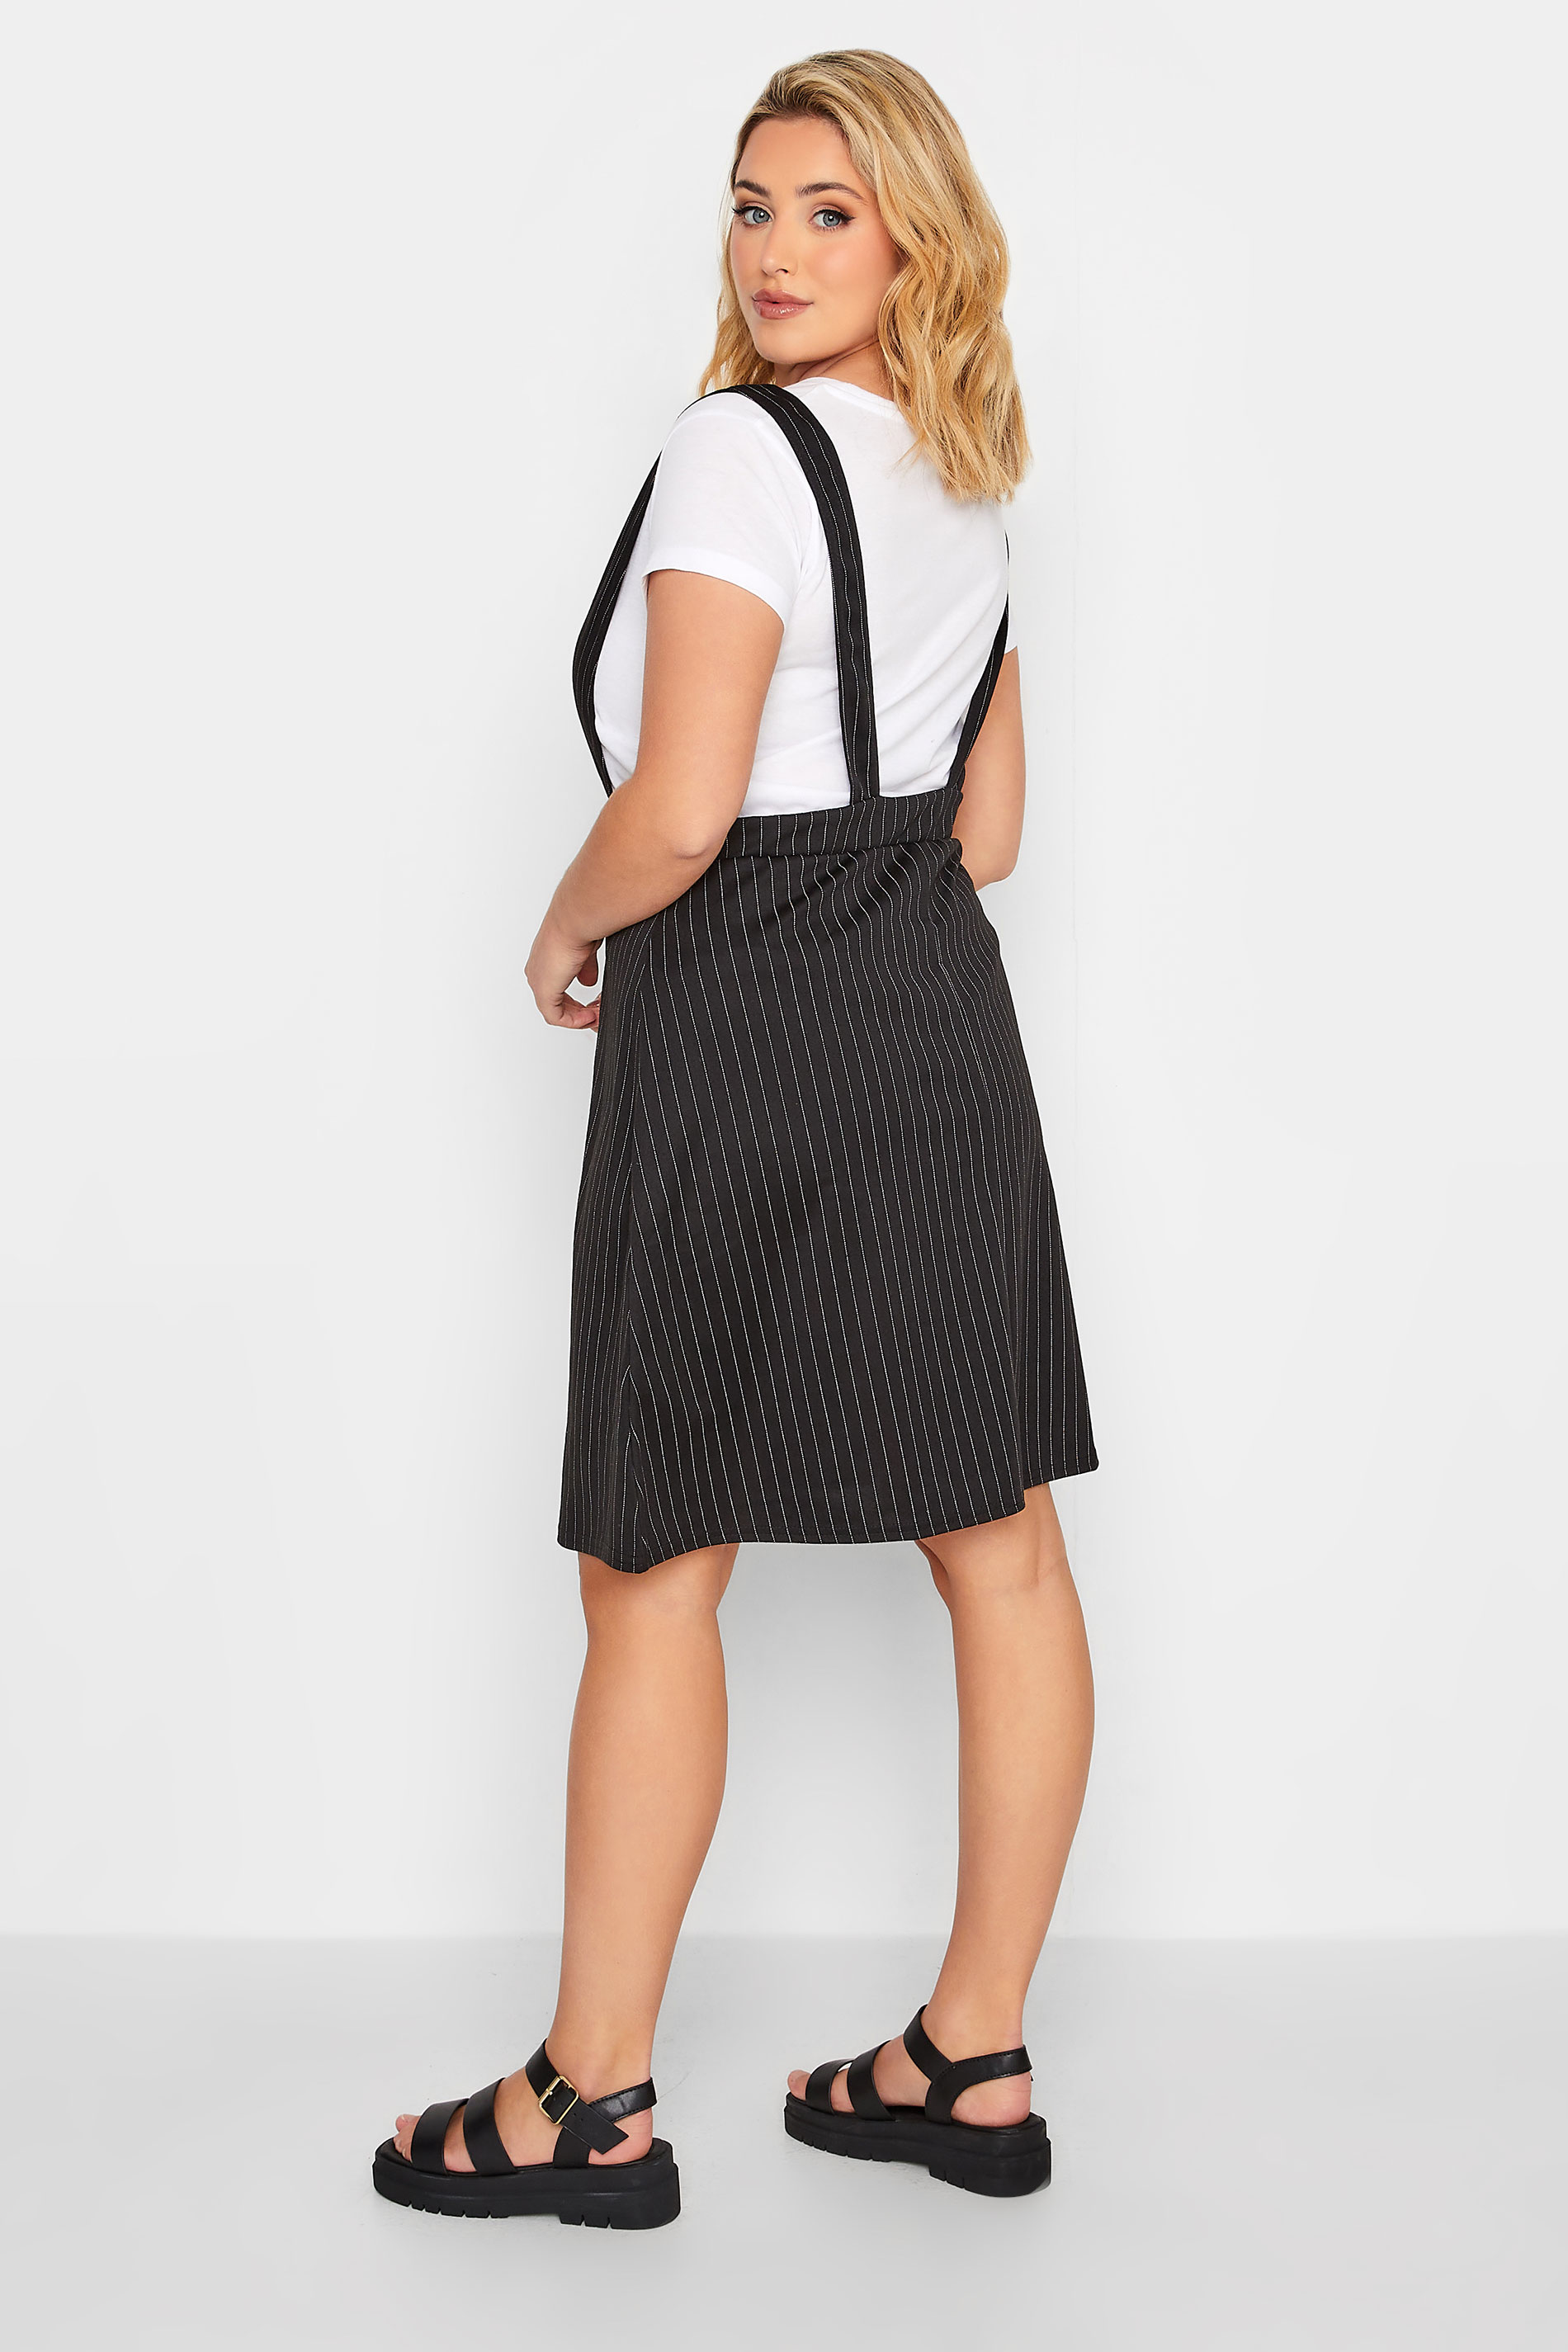 LIMITED COLLECTION Plus Size Black Pinstripe Pinafore Dress | Yours Clothing 2